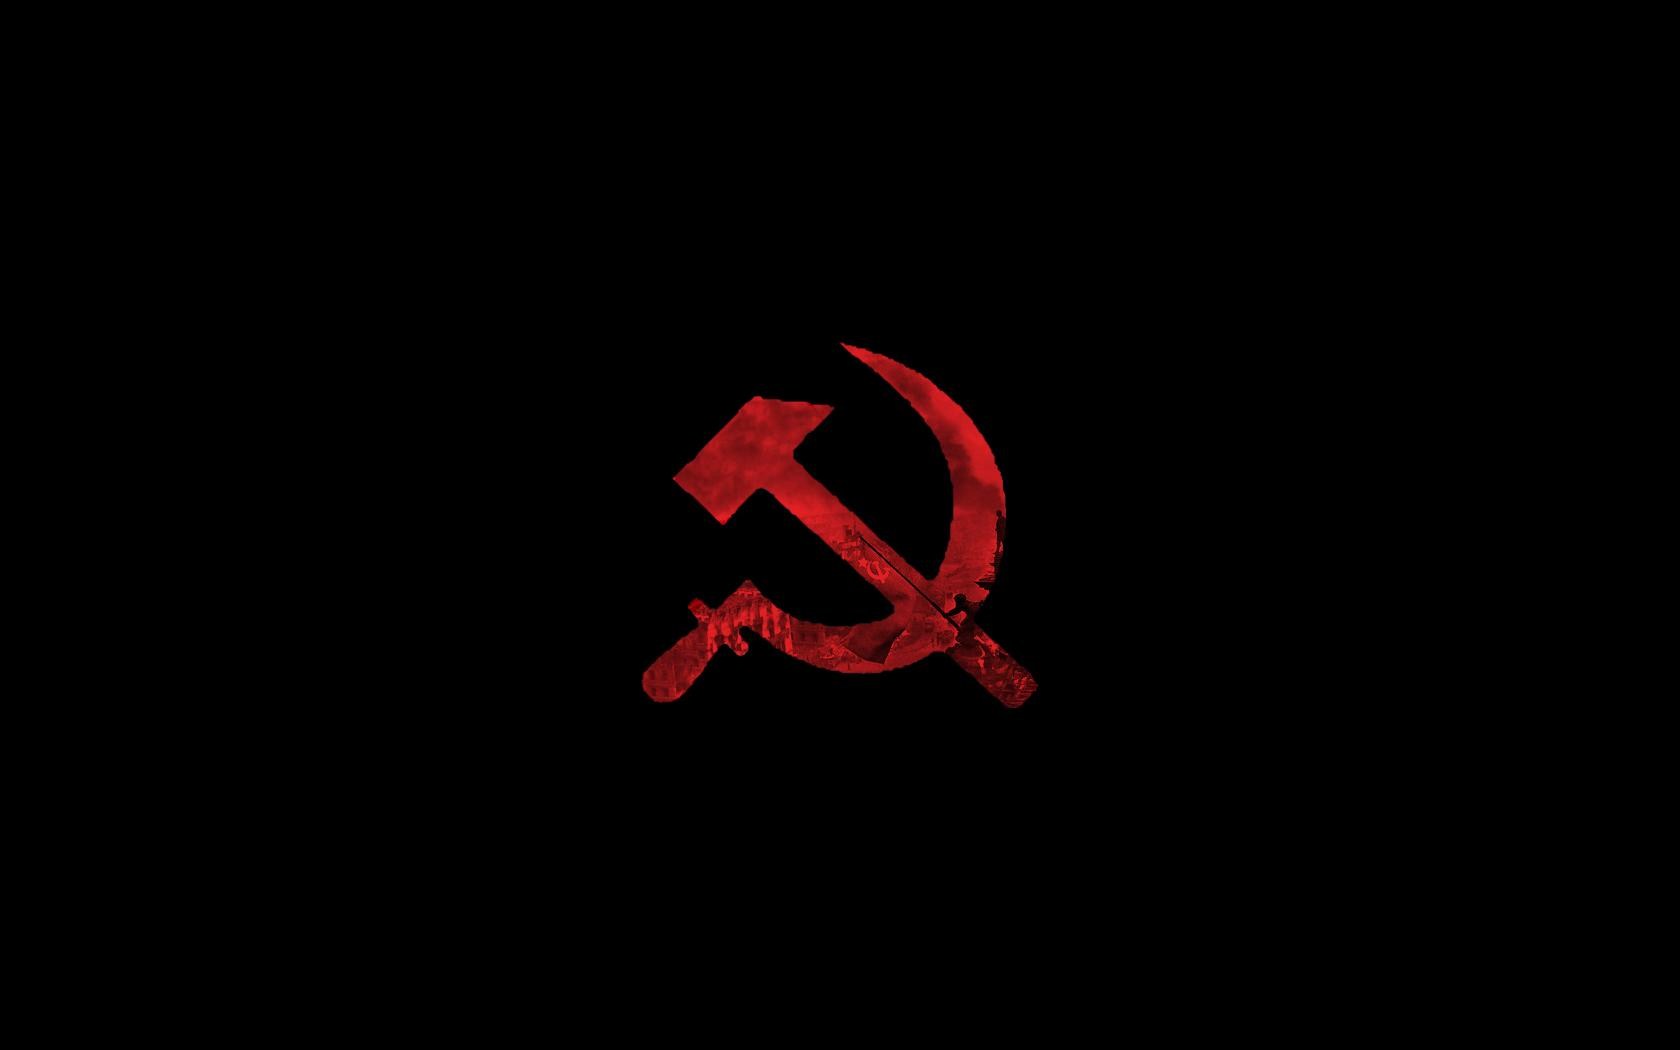 Soviet Union Wallpapers  Wallpaper Cave